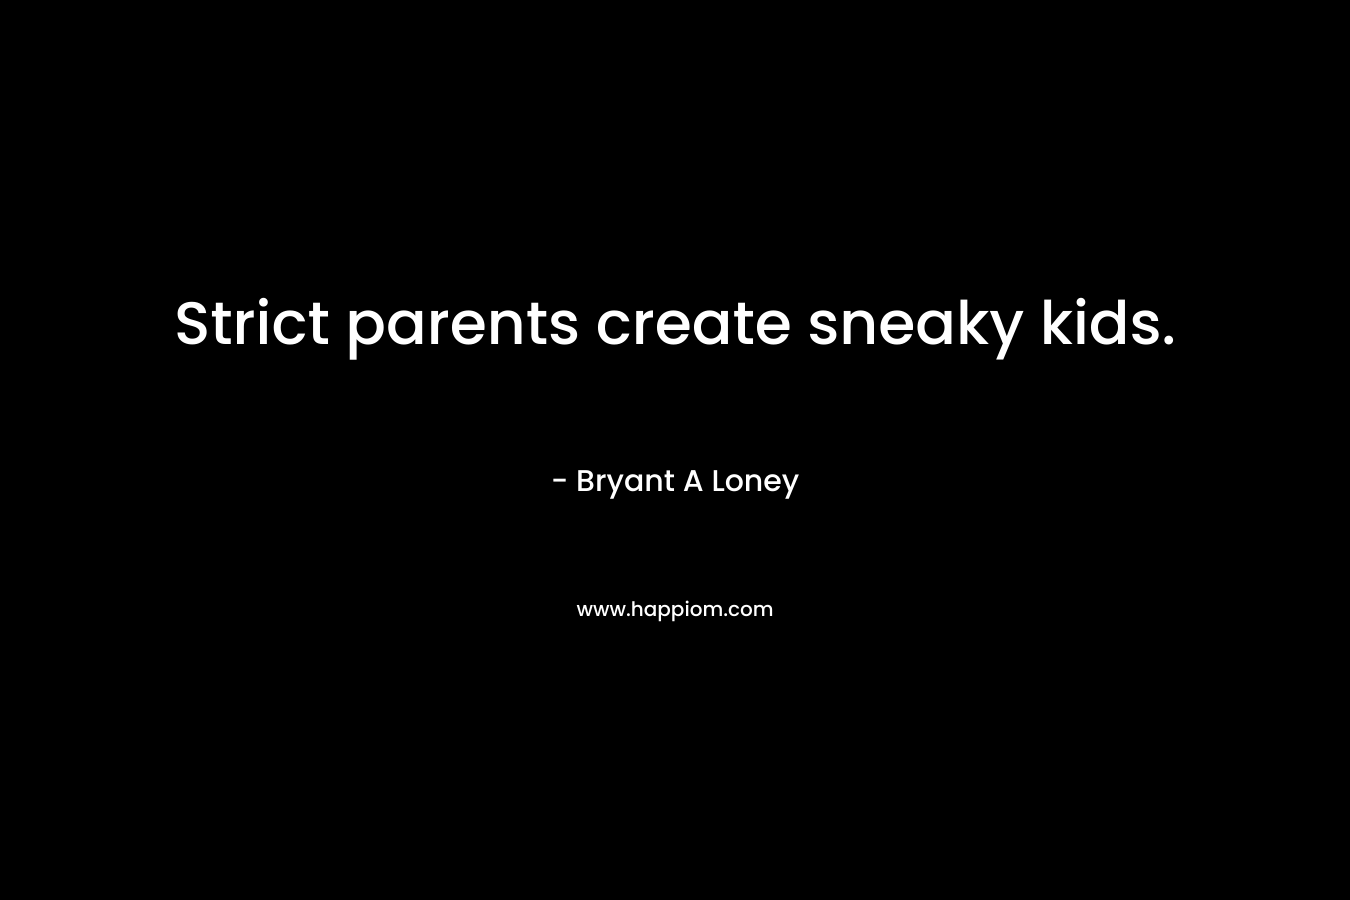 Strict parents create sneaky kids.